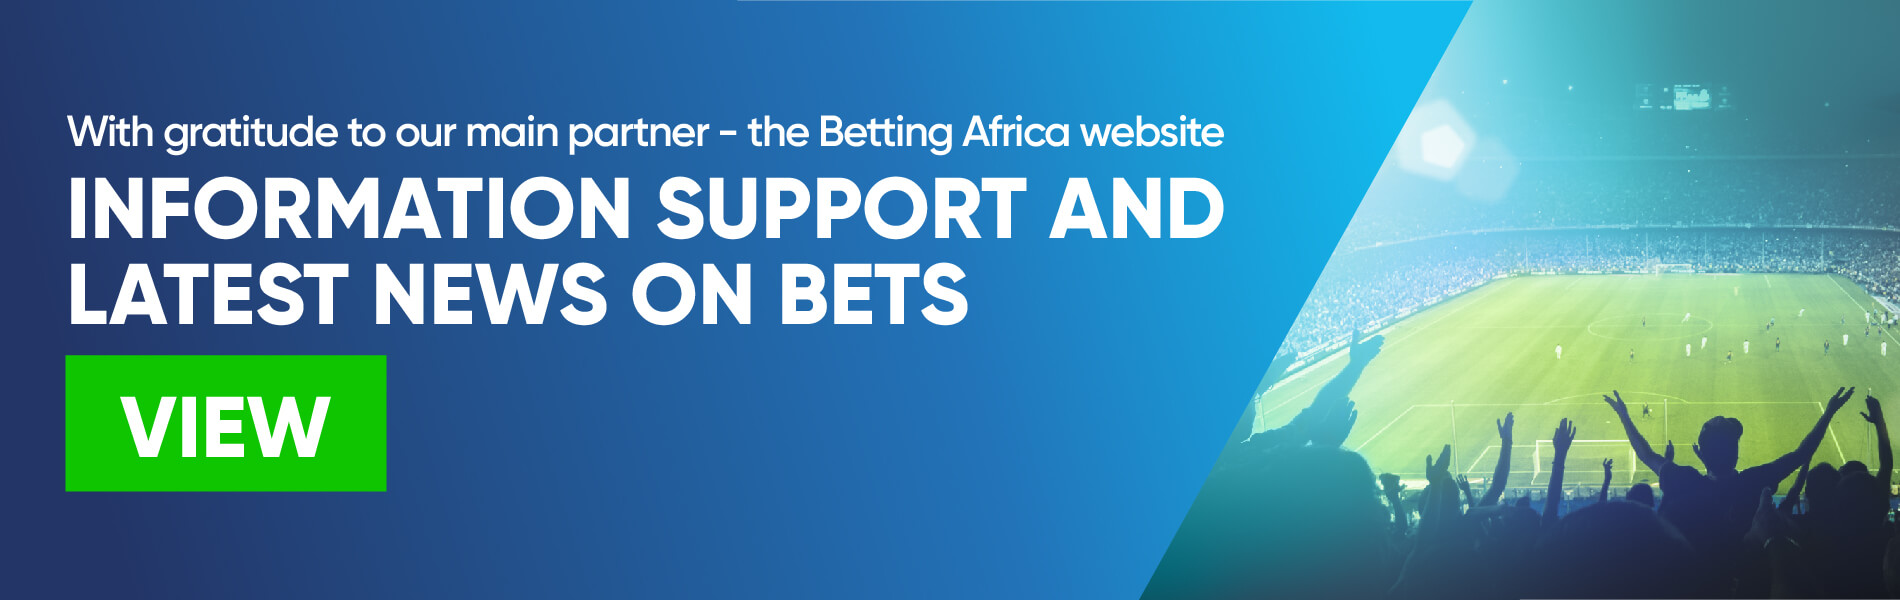 compilation of finest betting platforms in nigeria